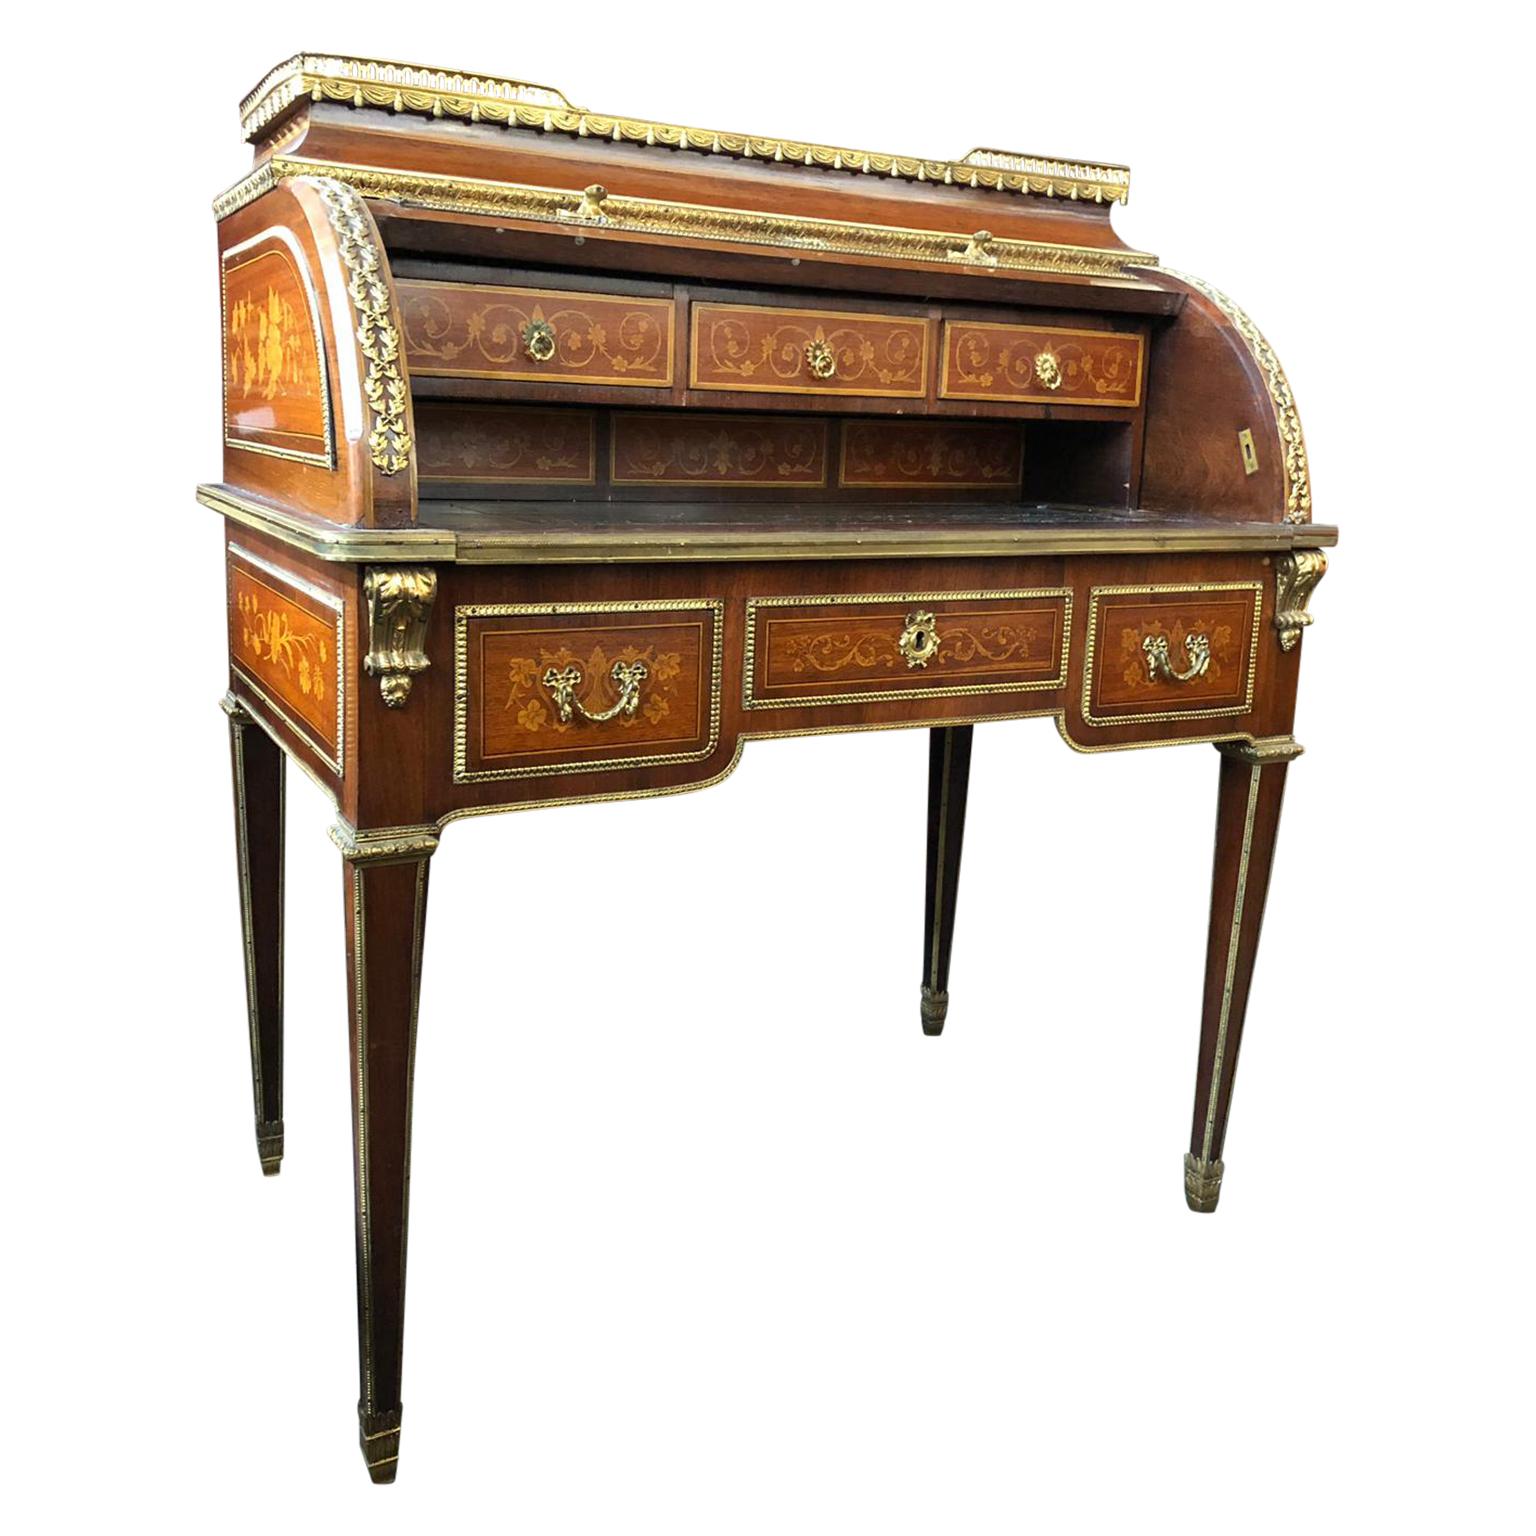 Inlay Superior 19th Century French Louis XVI Style Parquetry/Marquetry Cylinder Desk